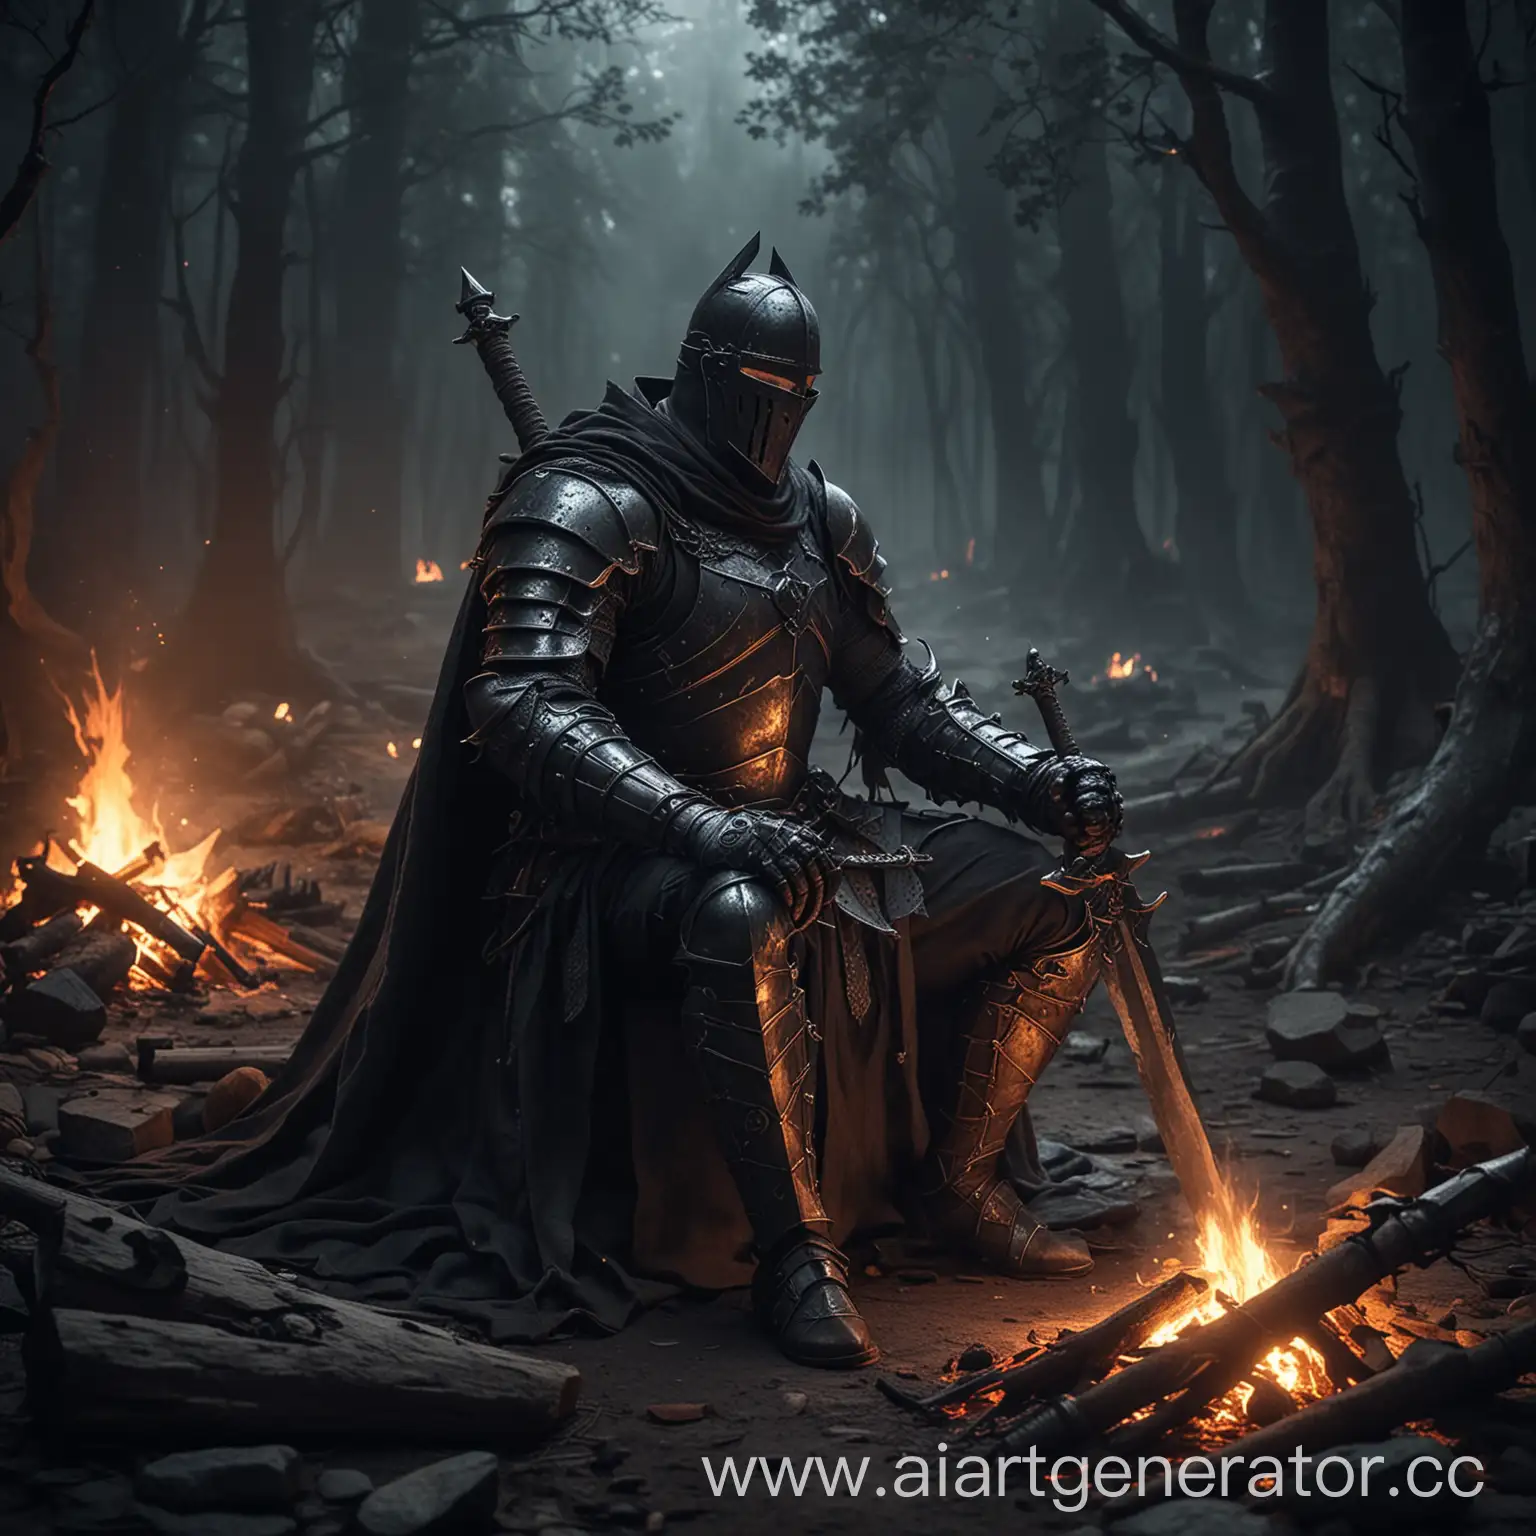 Dark fantasy A knight with a giant sword is sitting by the campfire
